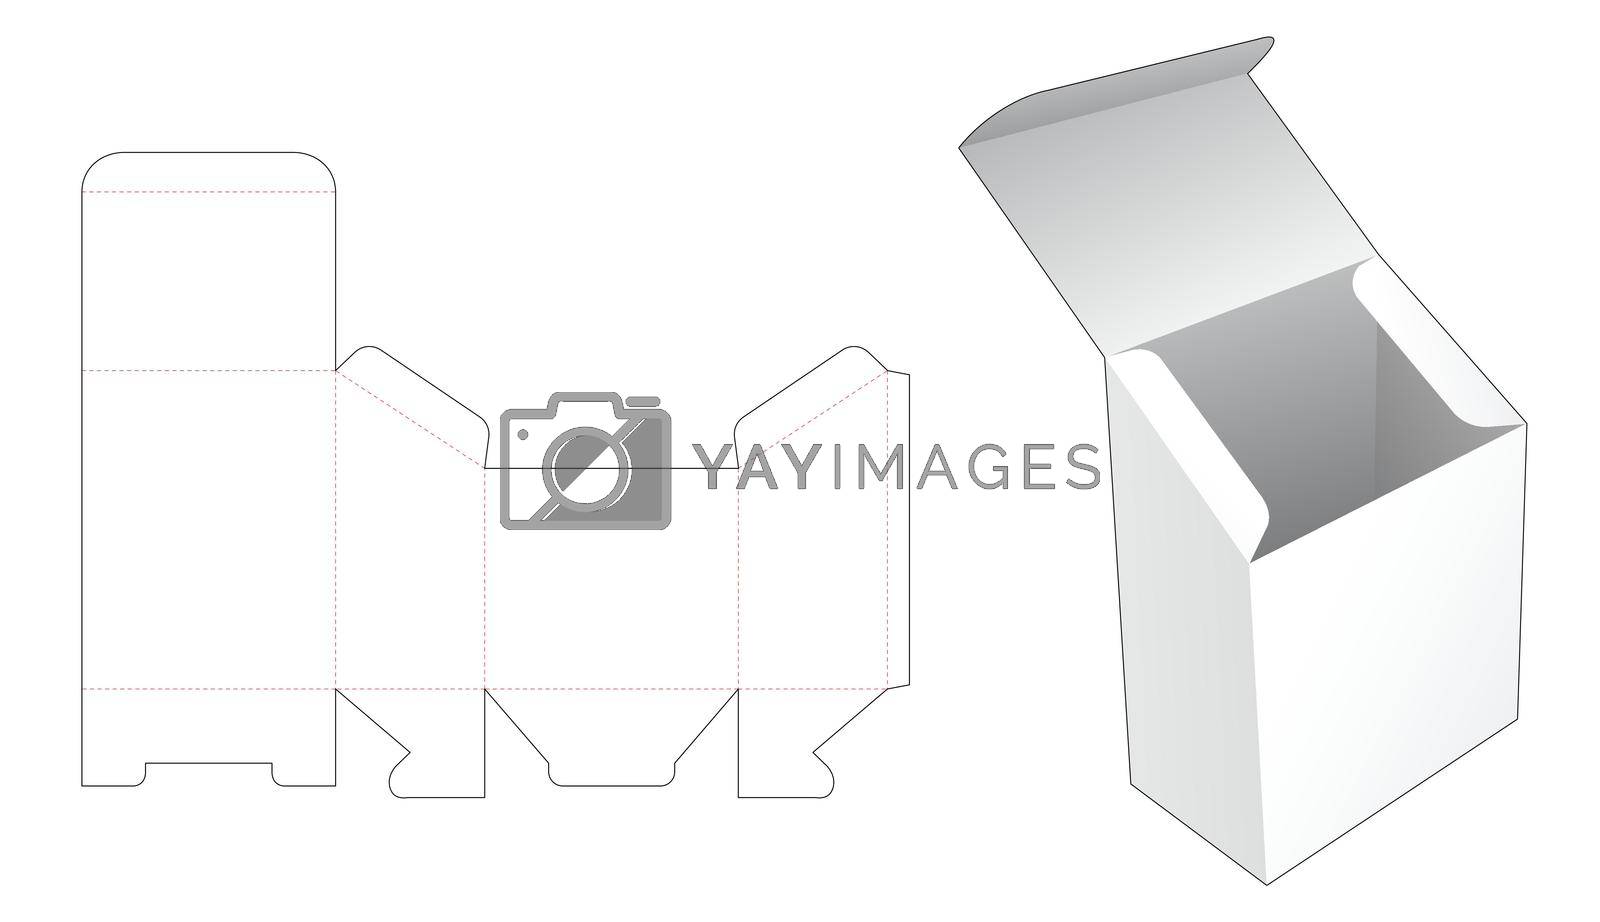 Royalty free image of Slope packaging die cut template and 3D mockup by valueinvestor